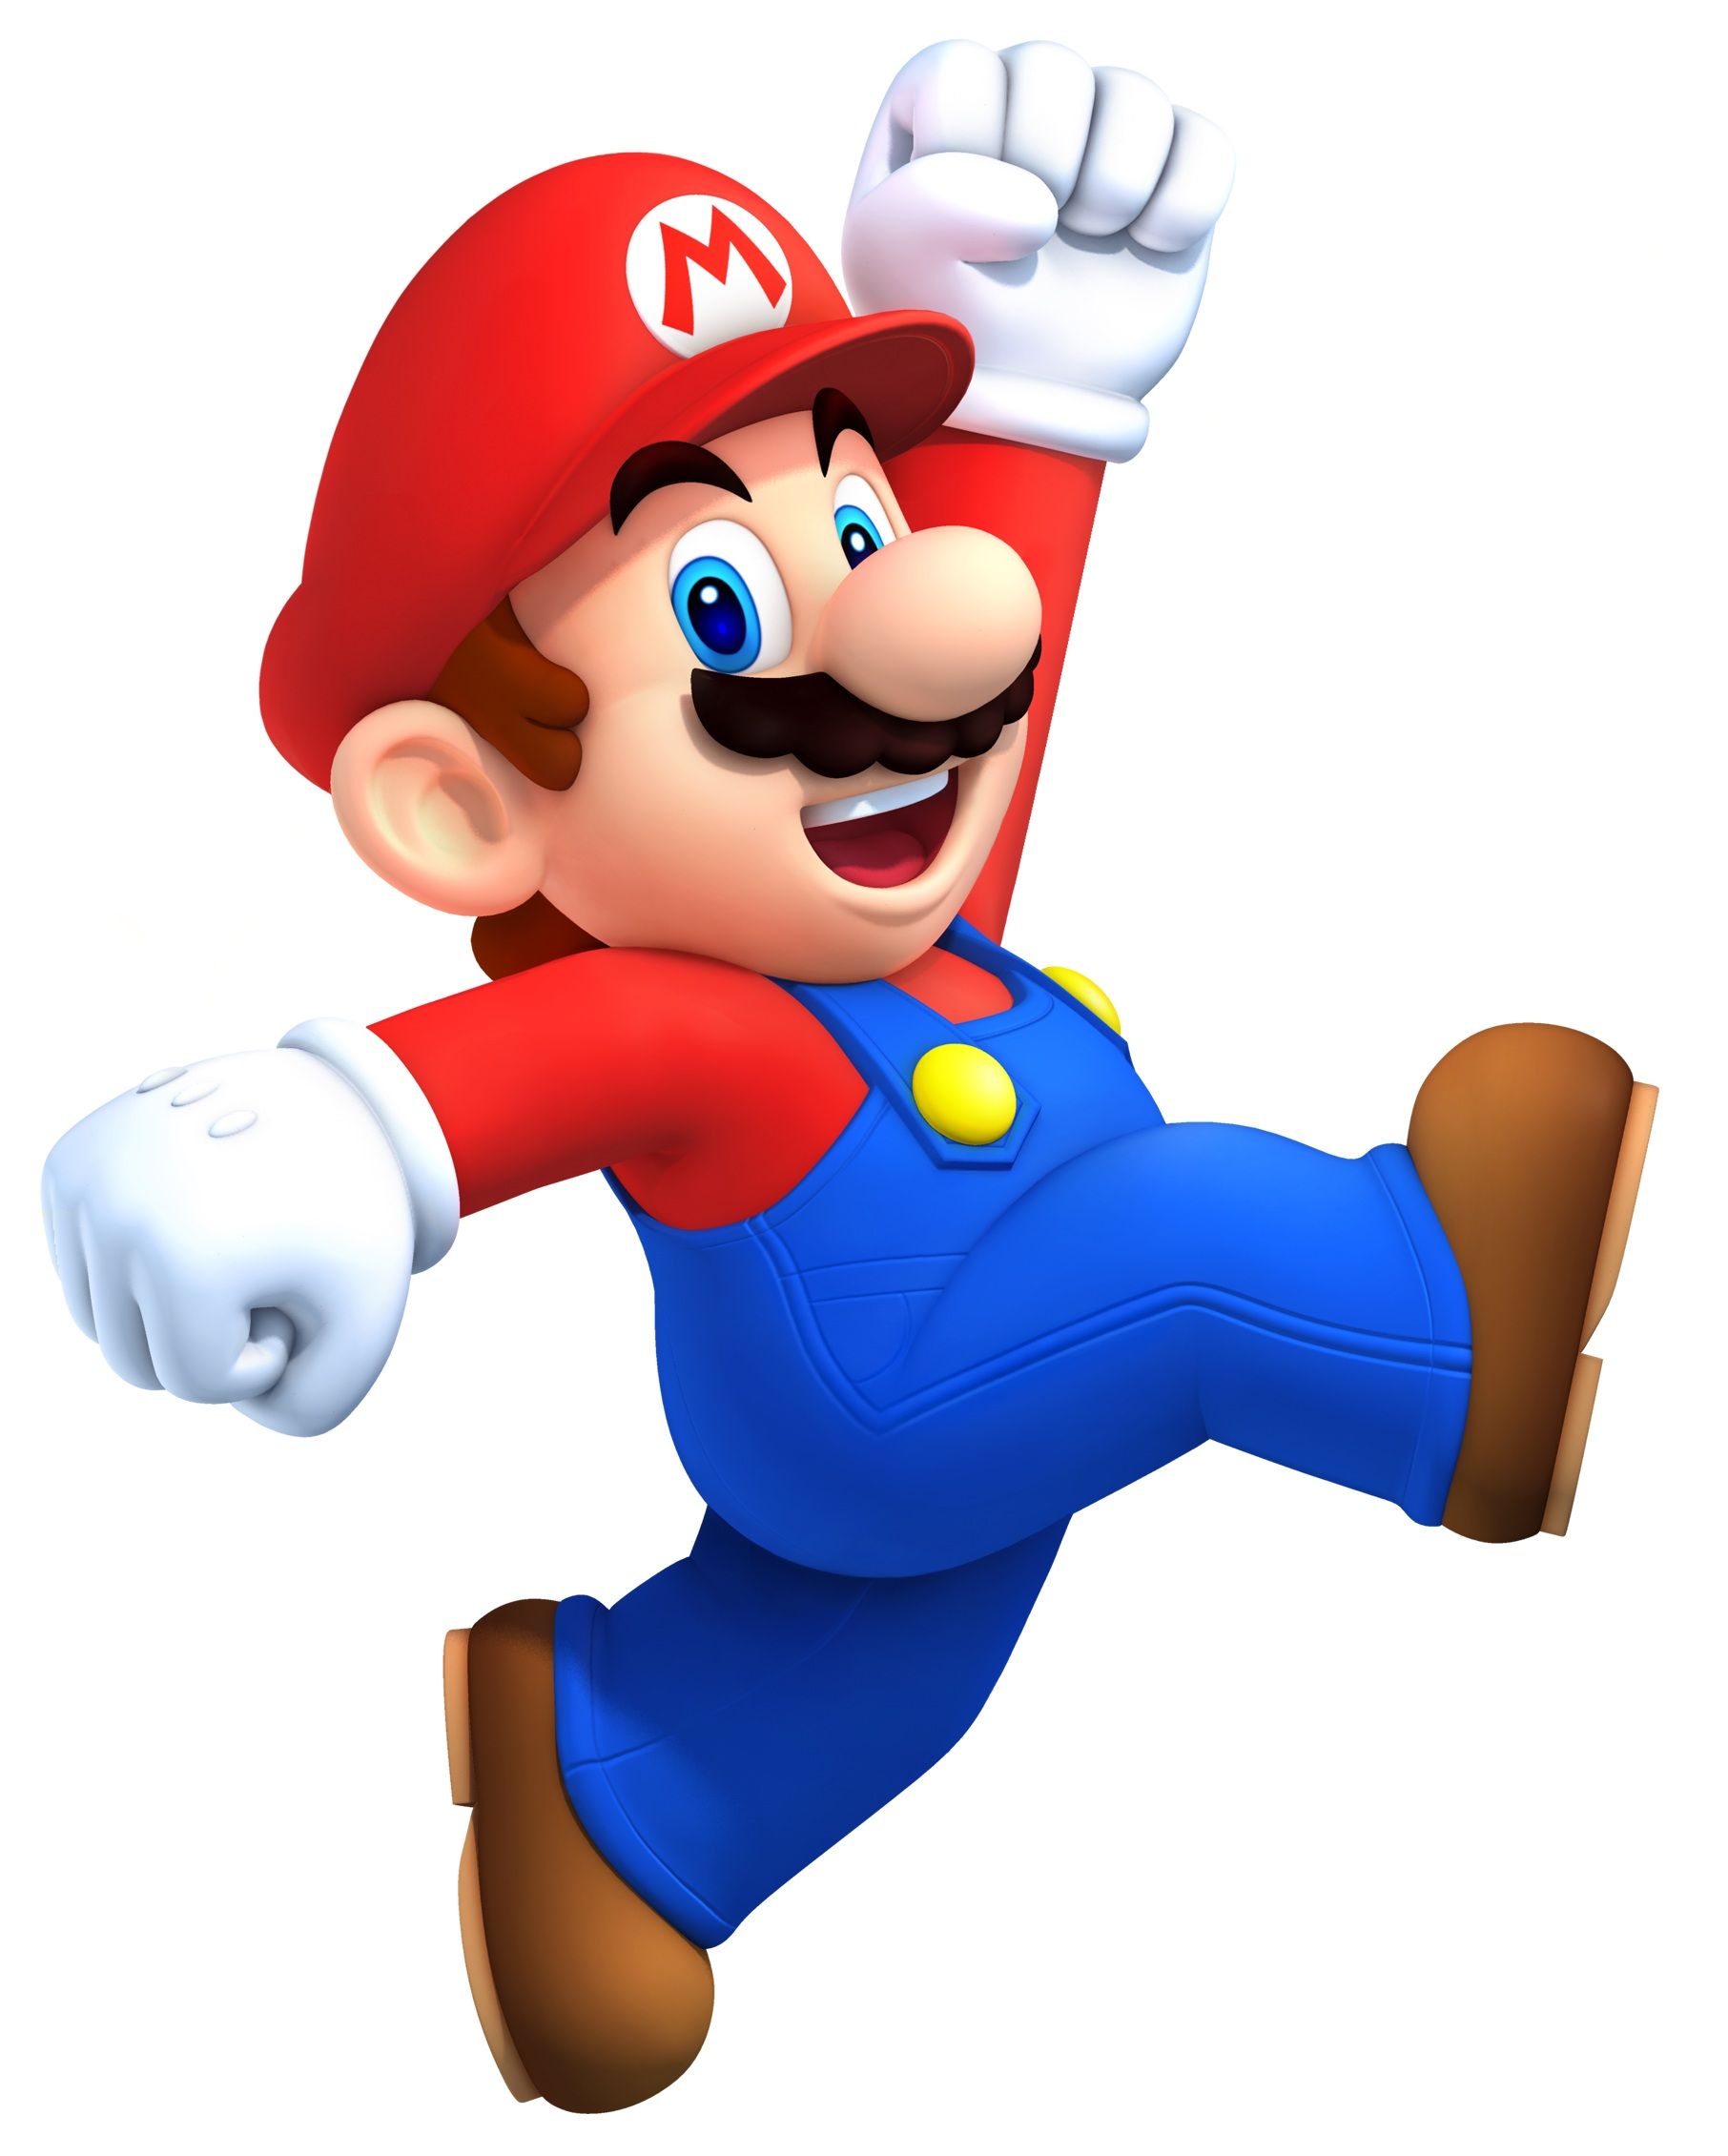 Mario as clipart free image download